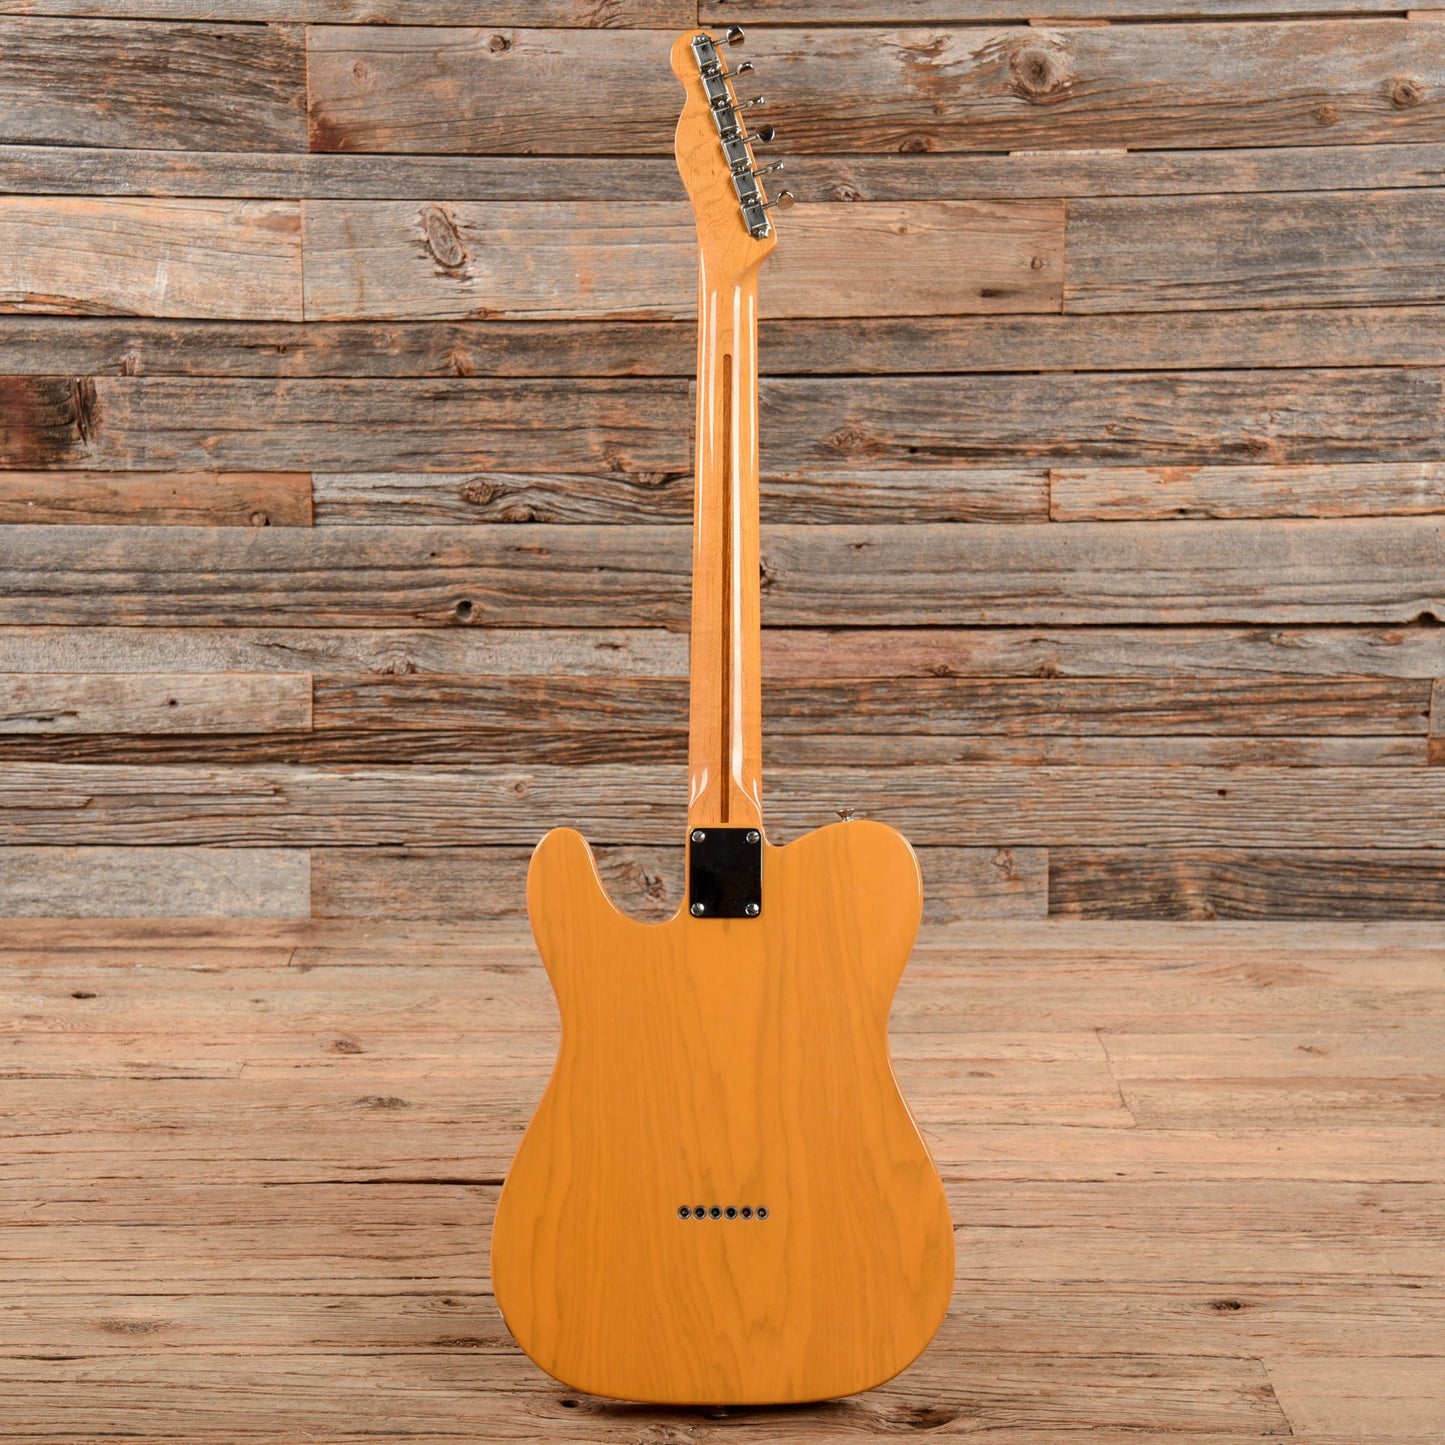 Fender American Vintage '52 Telecaster Butterscotch Blonde 2005 Electric Guitars / Solid Body